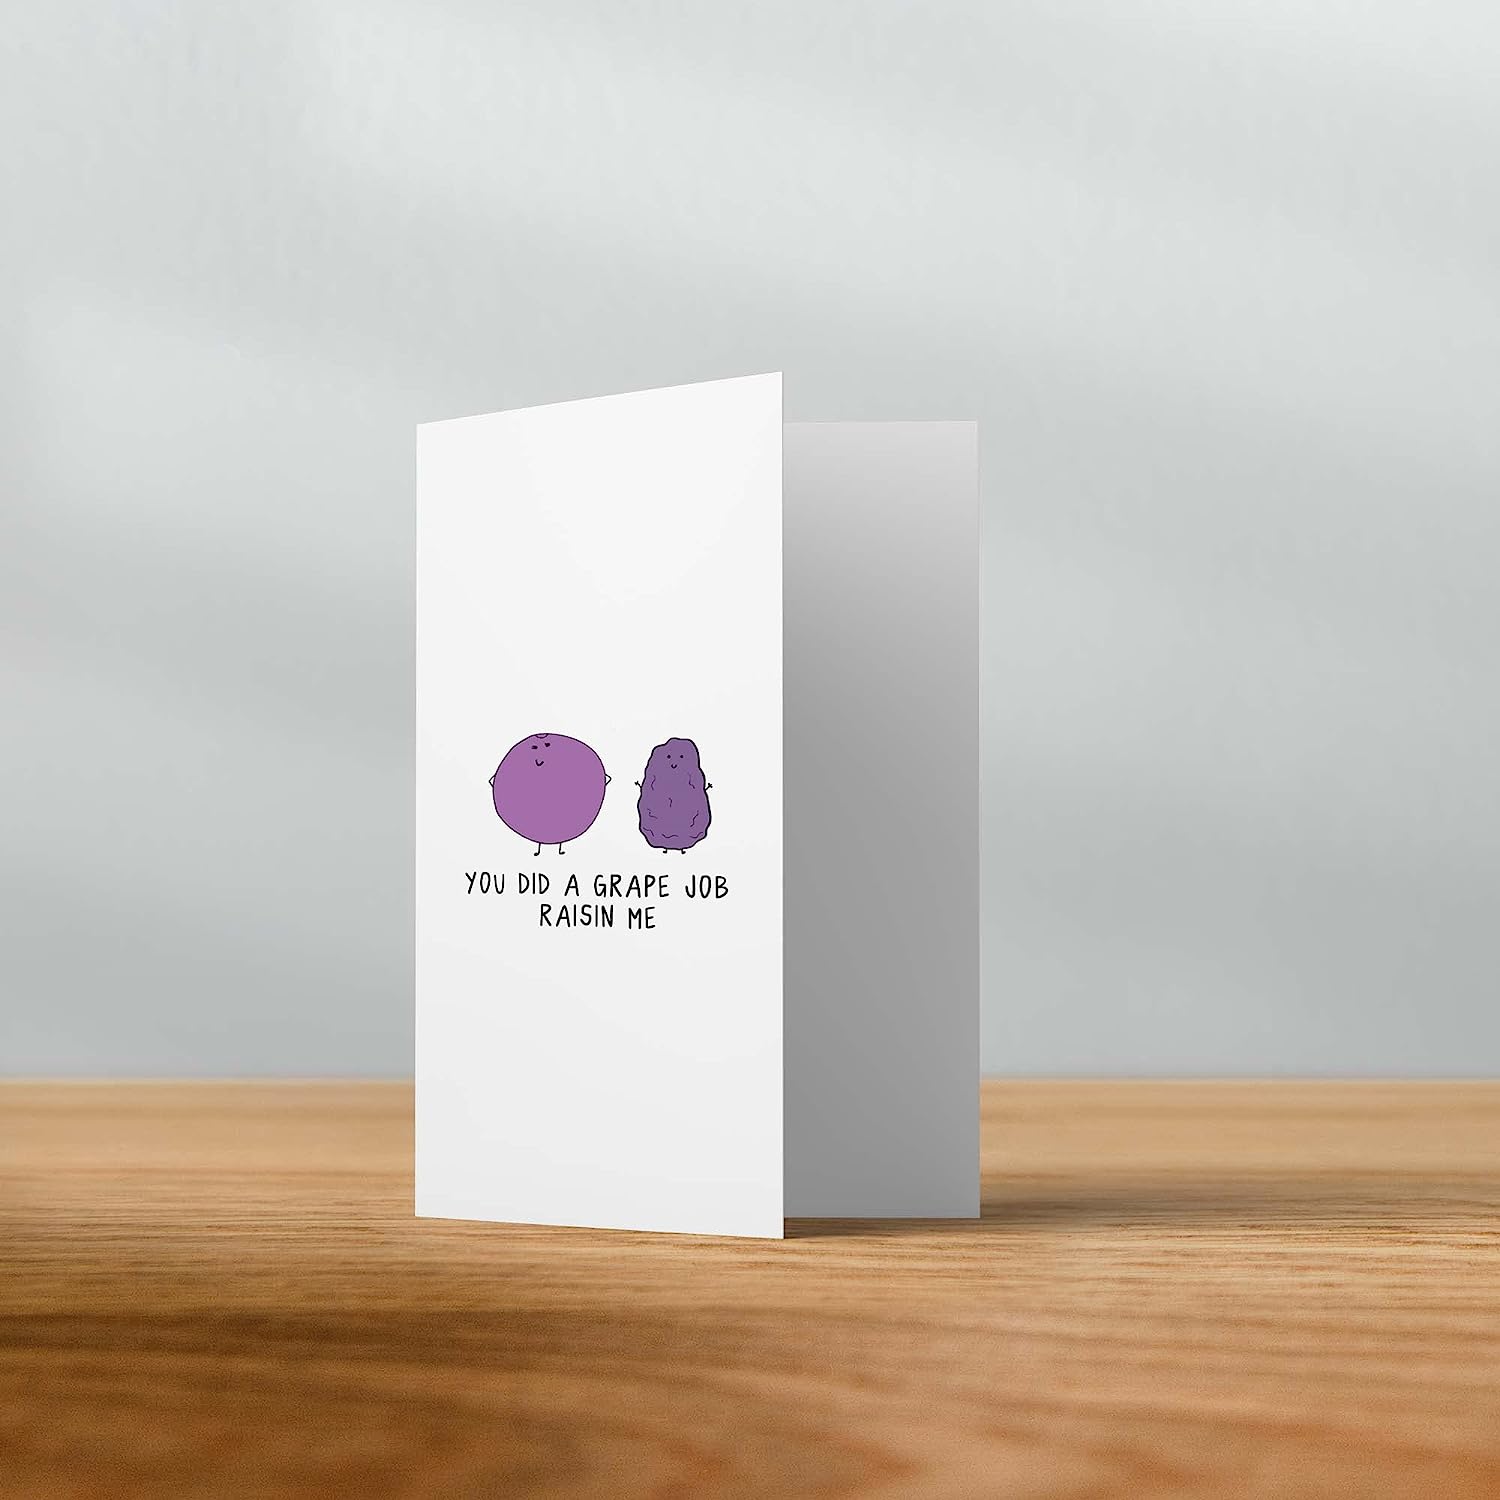 A Grape Job Raisin Me Card from rockdoodles adorned with a single purple dot on it.